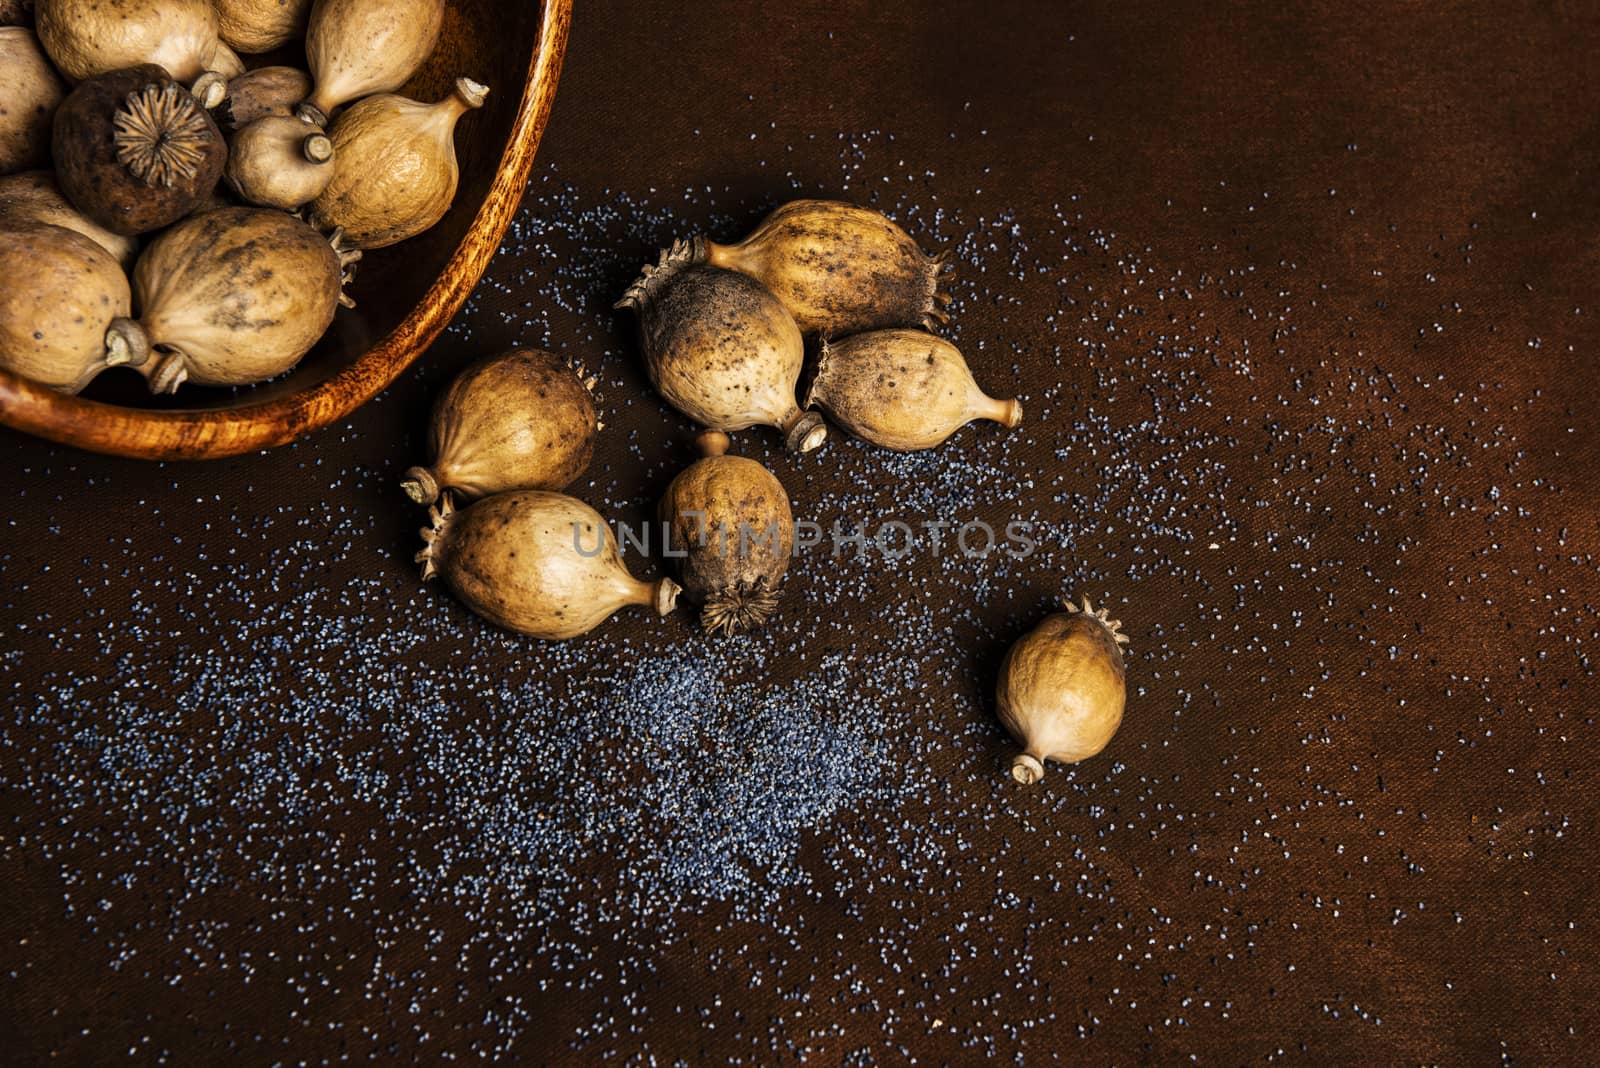 Wooden bowl full of scattered harvested poppy pods (Papaver somniferum) with many blue ripe poppy seeds lying on the brown background around